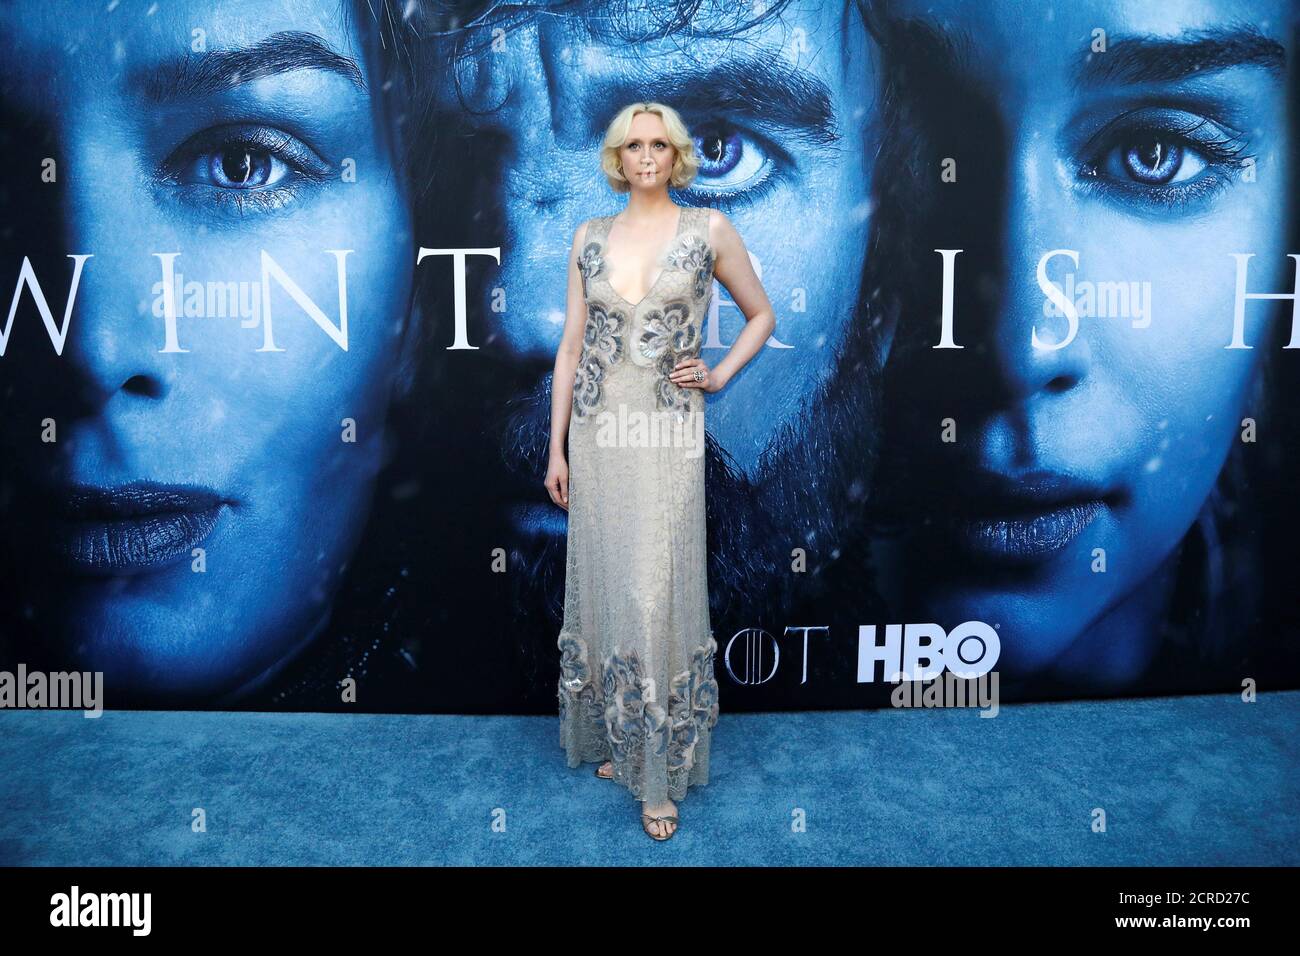 Cast member Gwendoline Christie poses at a premiere for season 7 of the television series 'Game of Thrones' in Los Angeles, California, U.S., July 12, 2017.   REUTERS/Mario Anzuoni Stock Photo